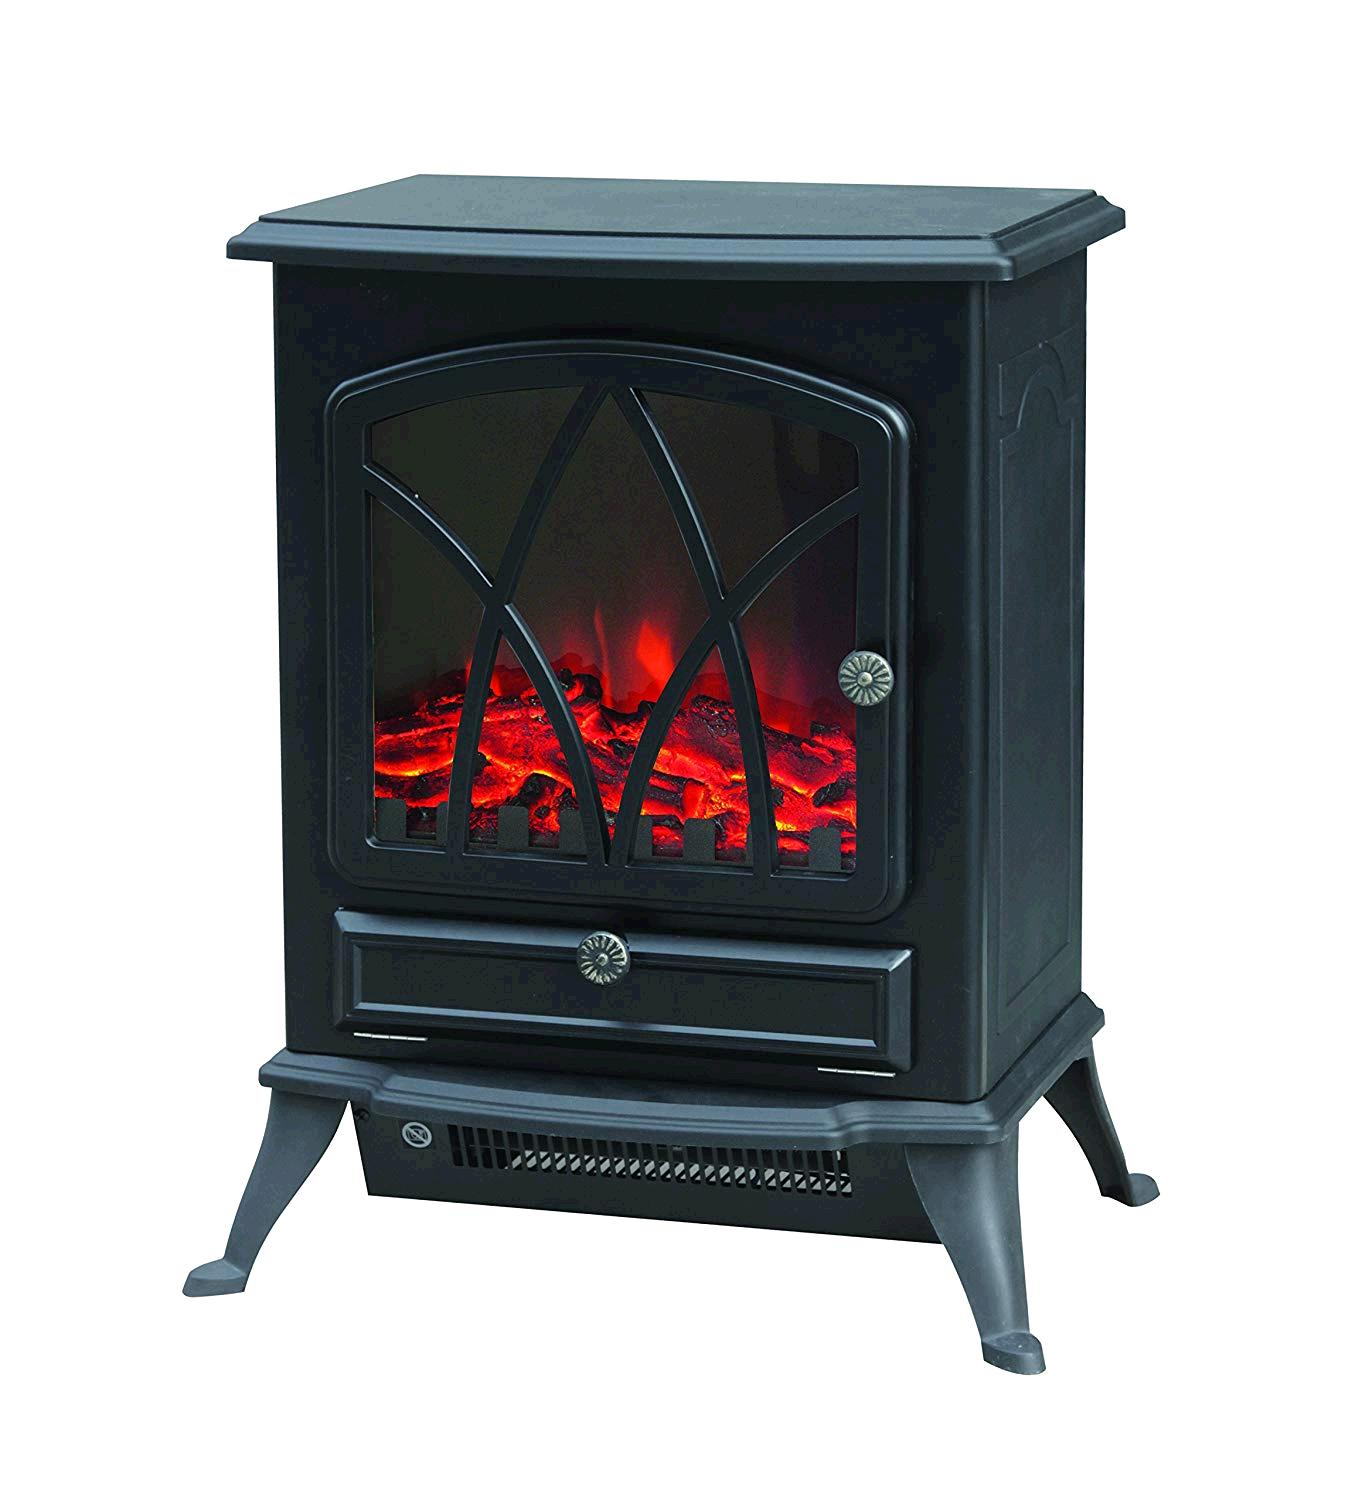 Warmlite WL46018 Stirling Electric Fire Stove with Realistic LED Log Flame, 2000 W - Black 